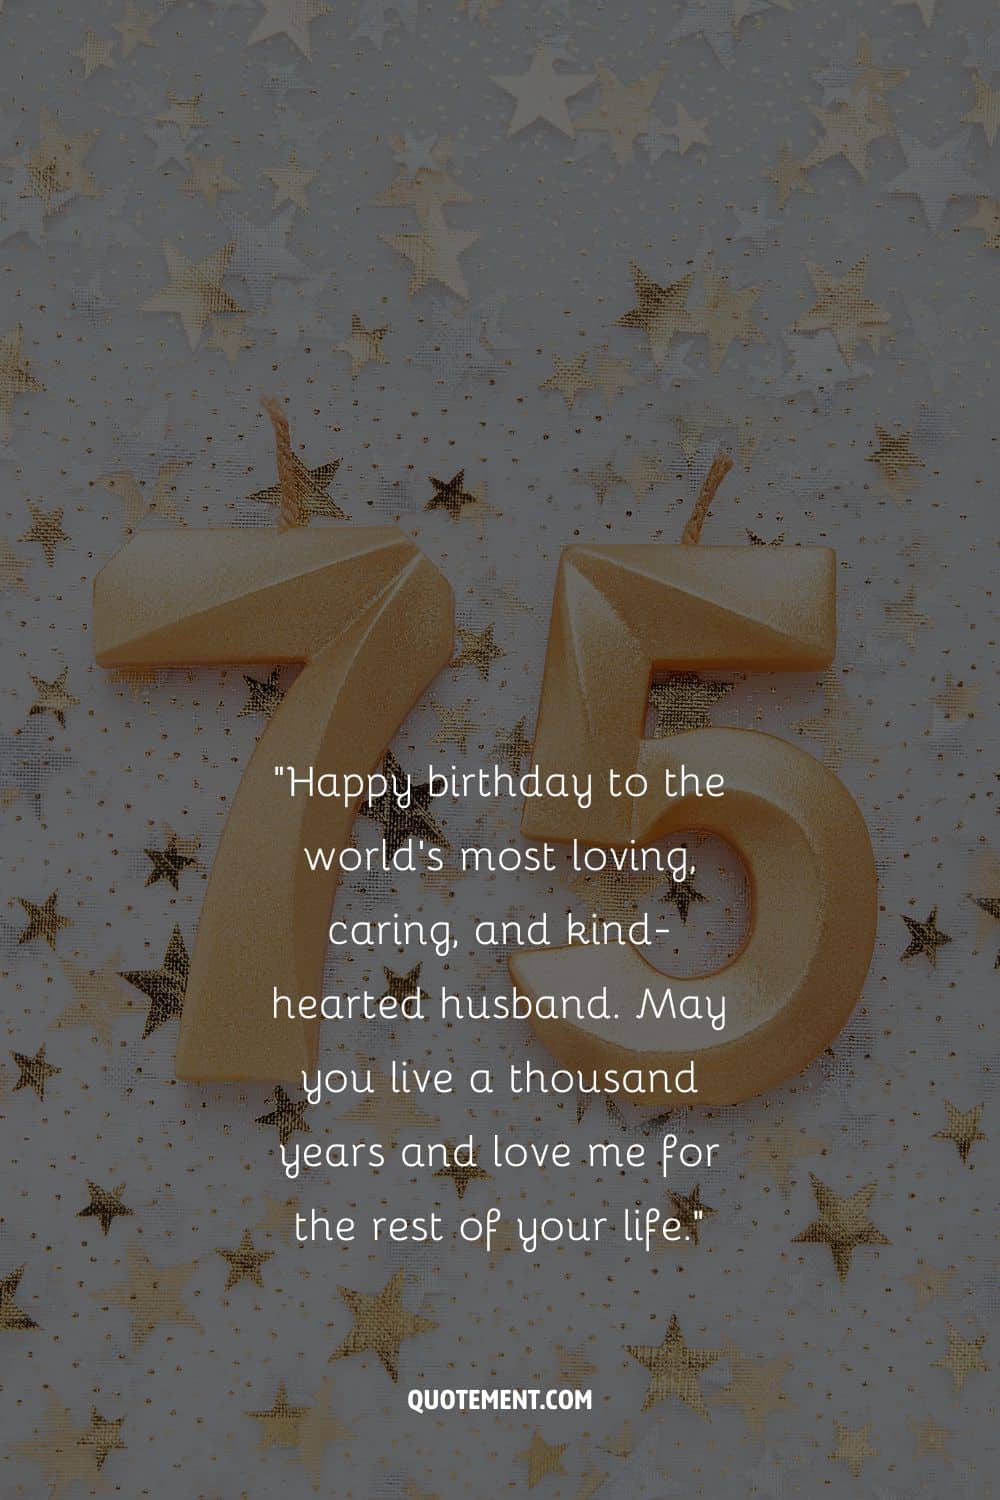 “Happy birthday to the world’s most loving, caring, and kind-hearted husband. May you live a thousand years and love me for the rest of your life.”